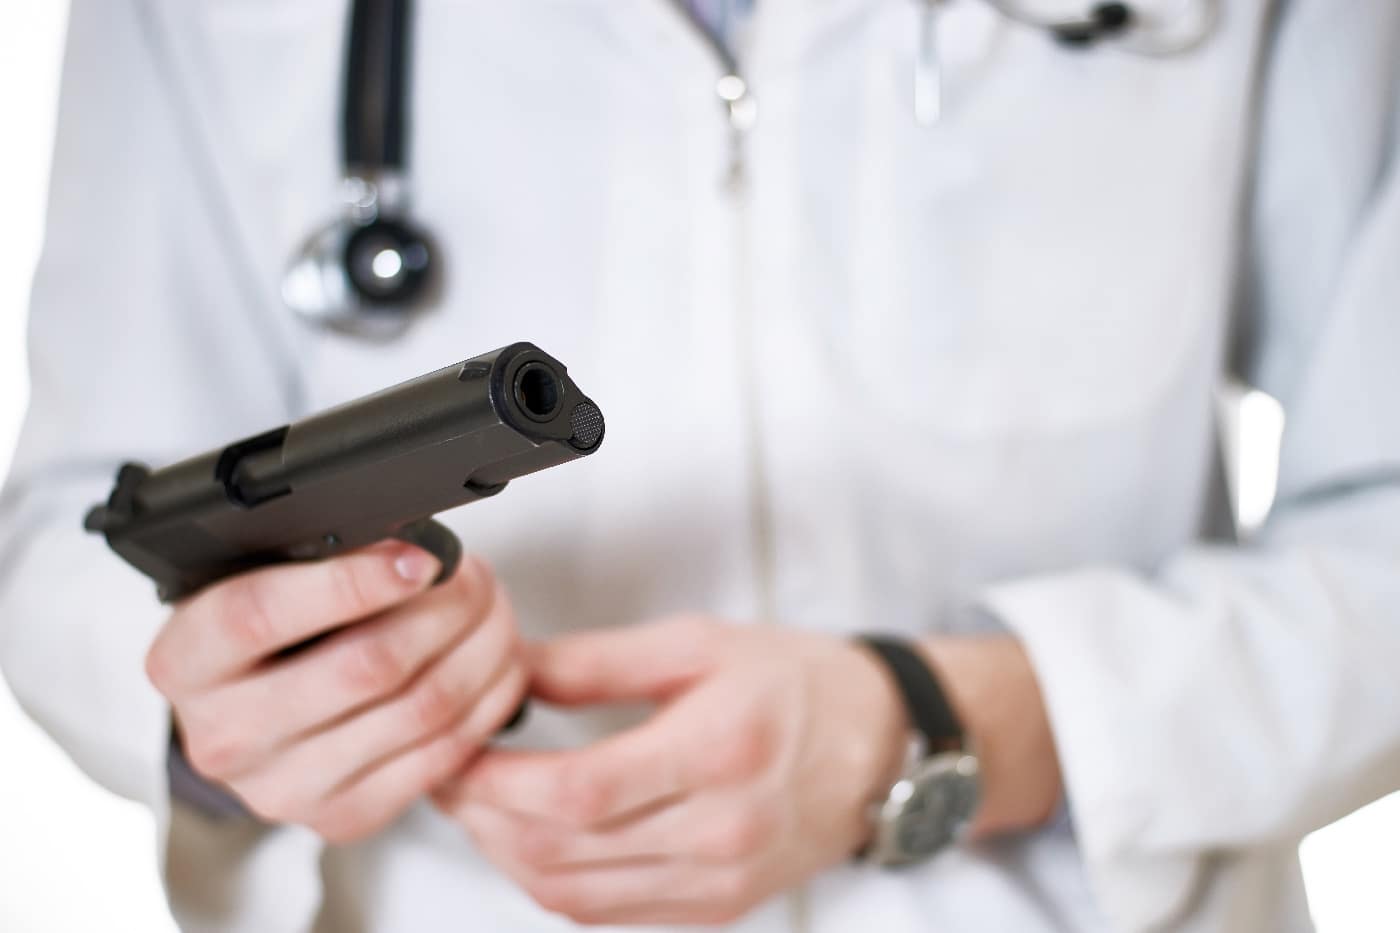 doctor in white coat carrying a 1911 pistol 45 acp